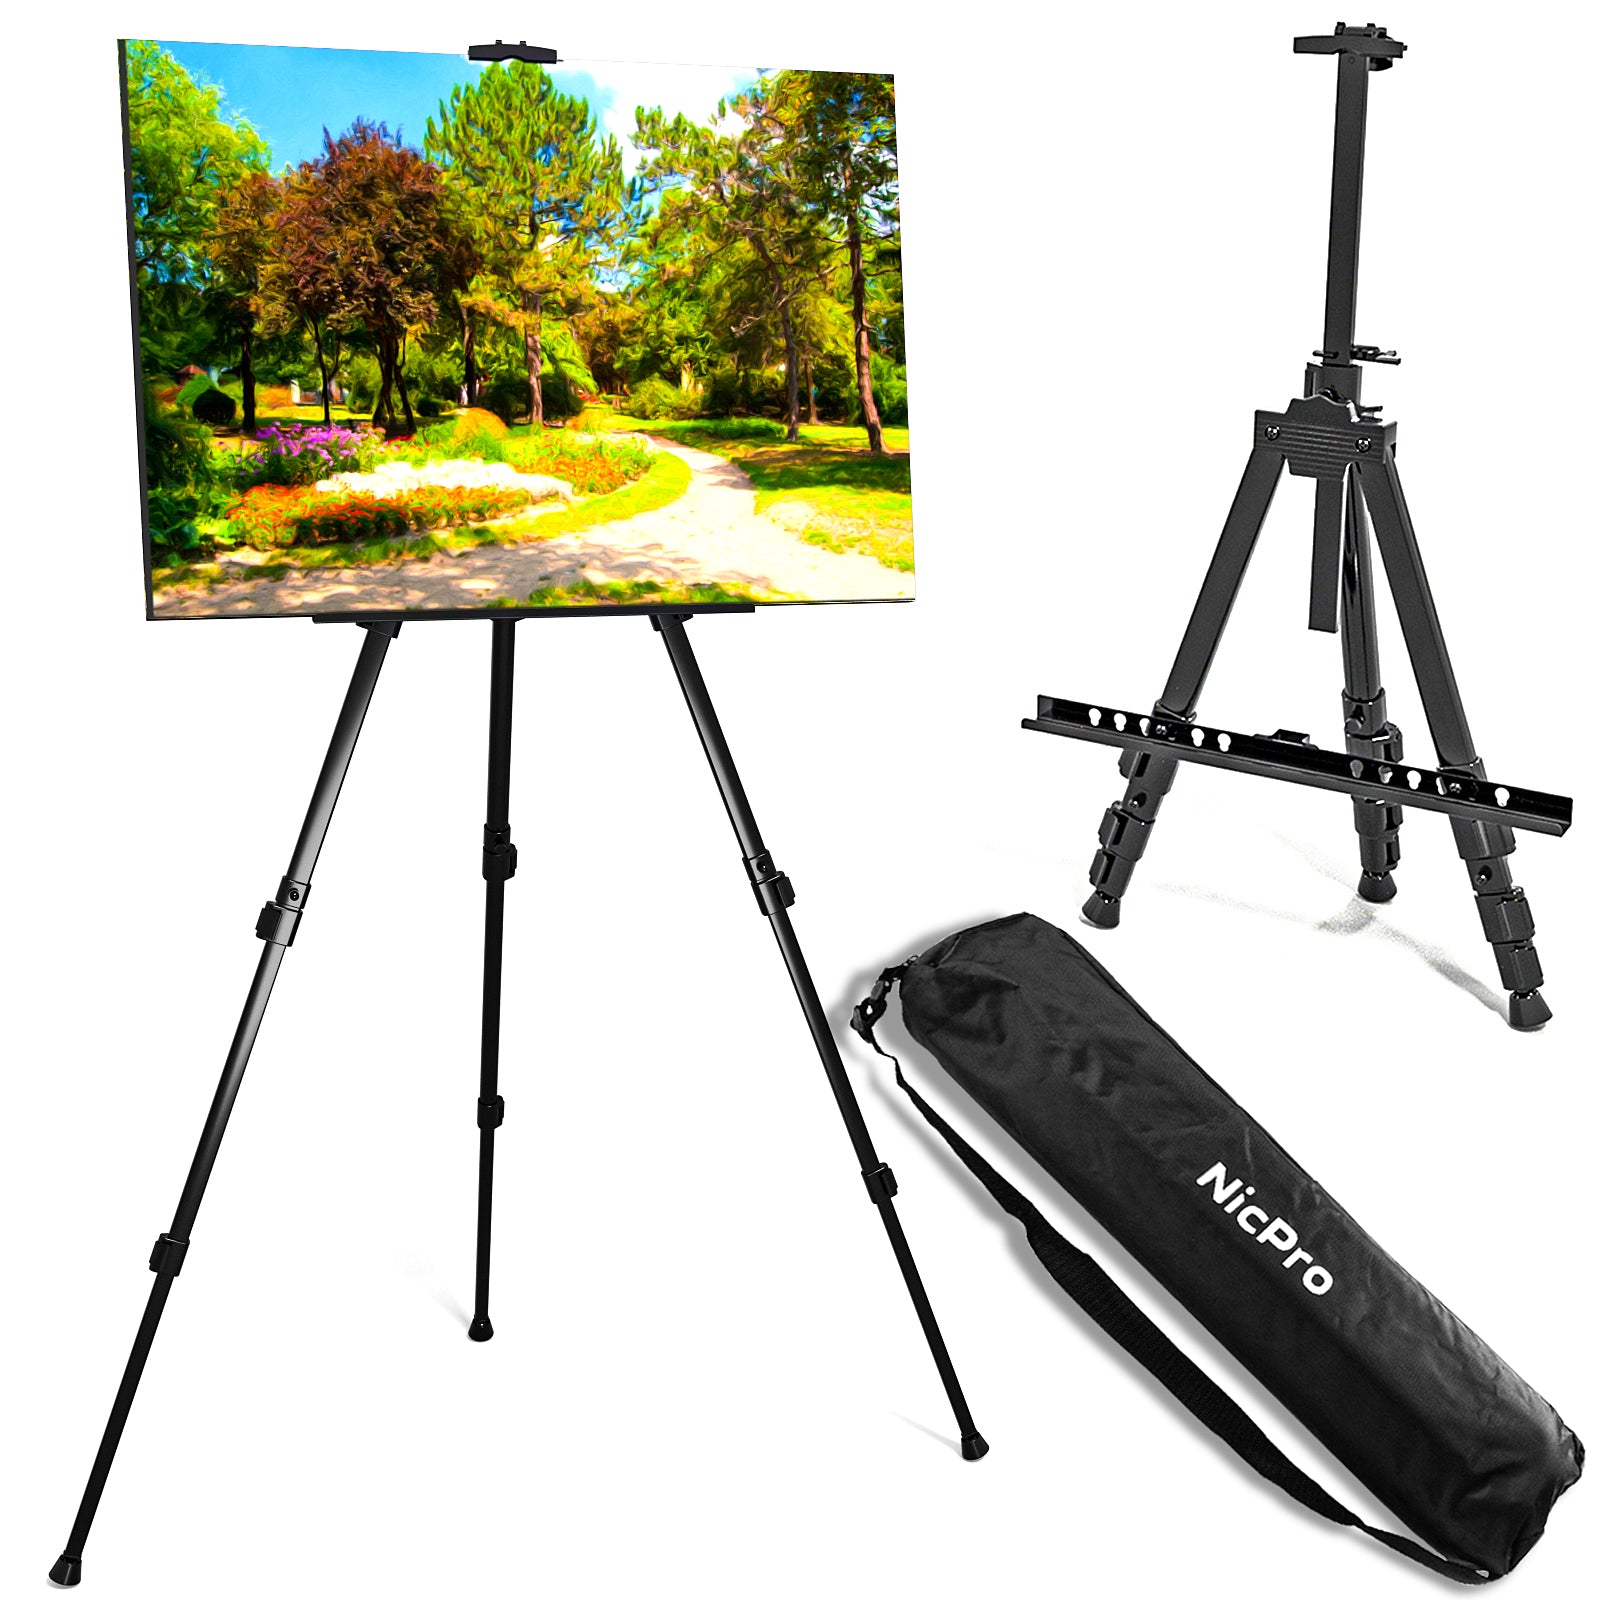 Nicpro Painting Easel for Display, Adjustable Height 17" to 63" Tabletop & Floor Art Easel, Aluminum Tripod Artist Easels Stand for Painting Canvas, Wedding Signs with Carry Bag - Black